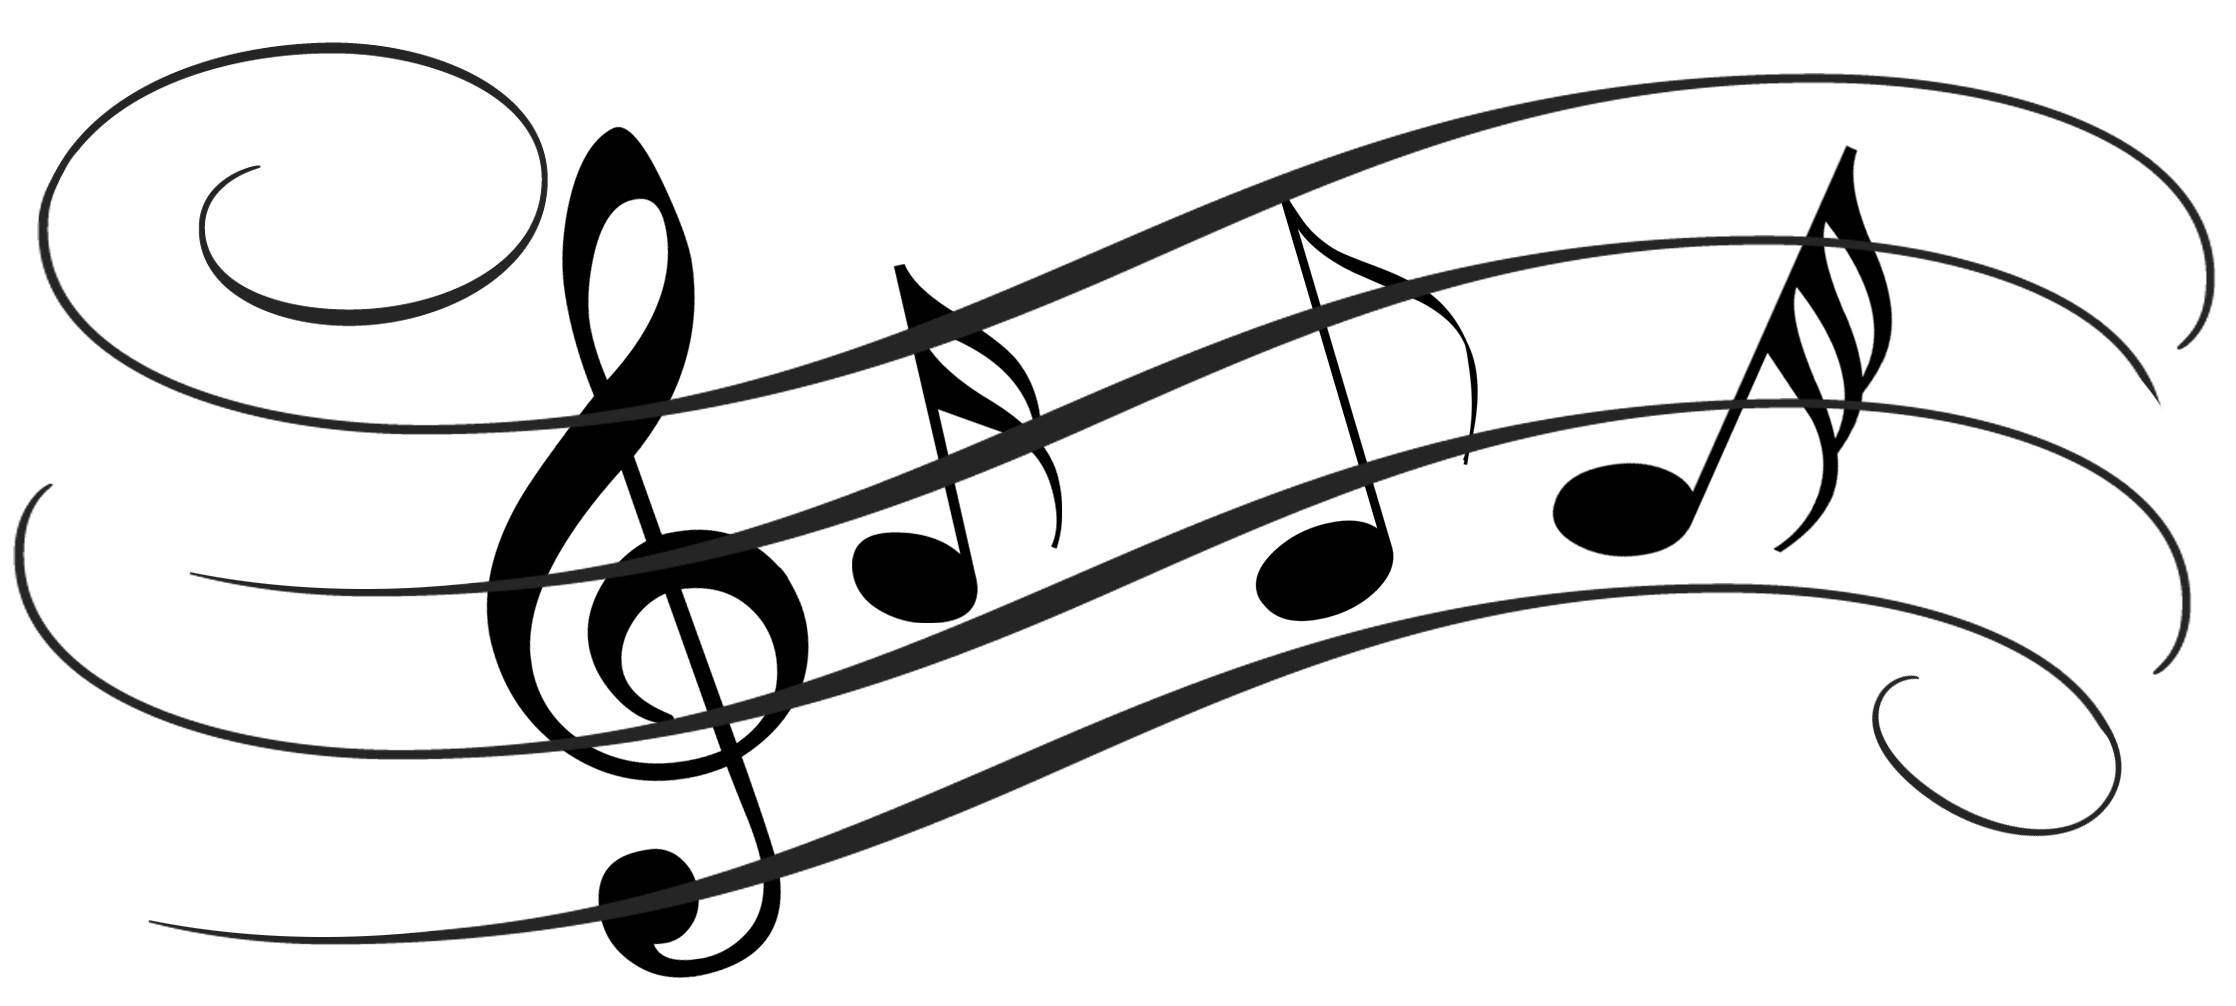 Music Notes On Staff Clipart   Clipart Panda   Free Clipart Images